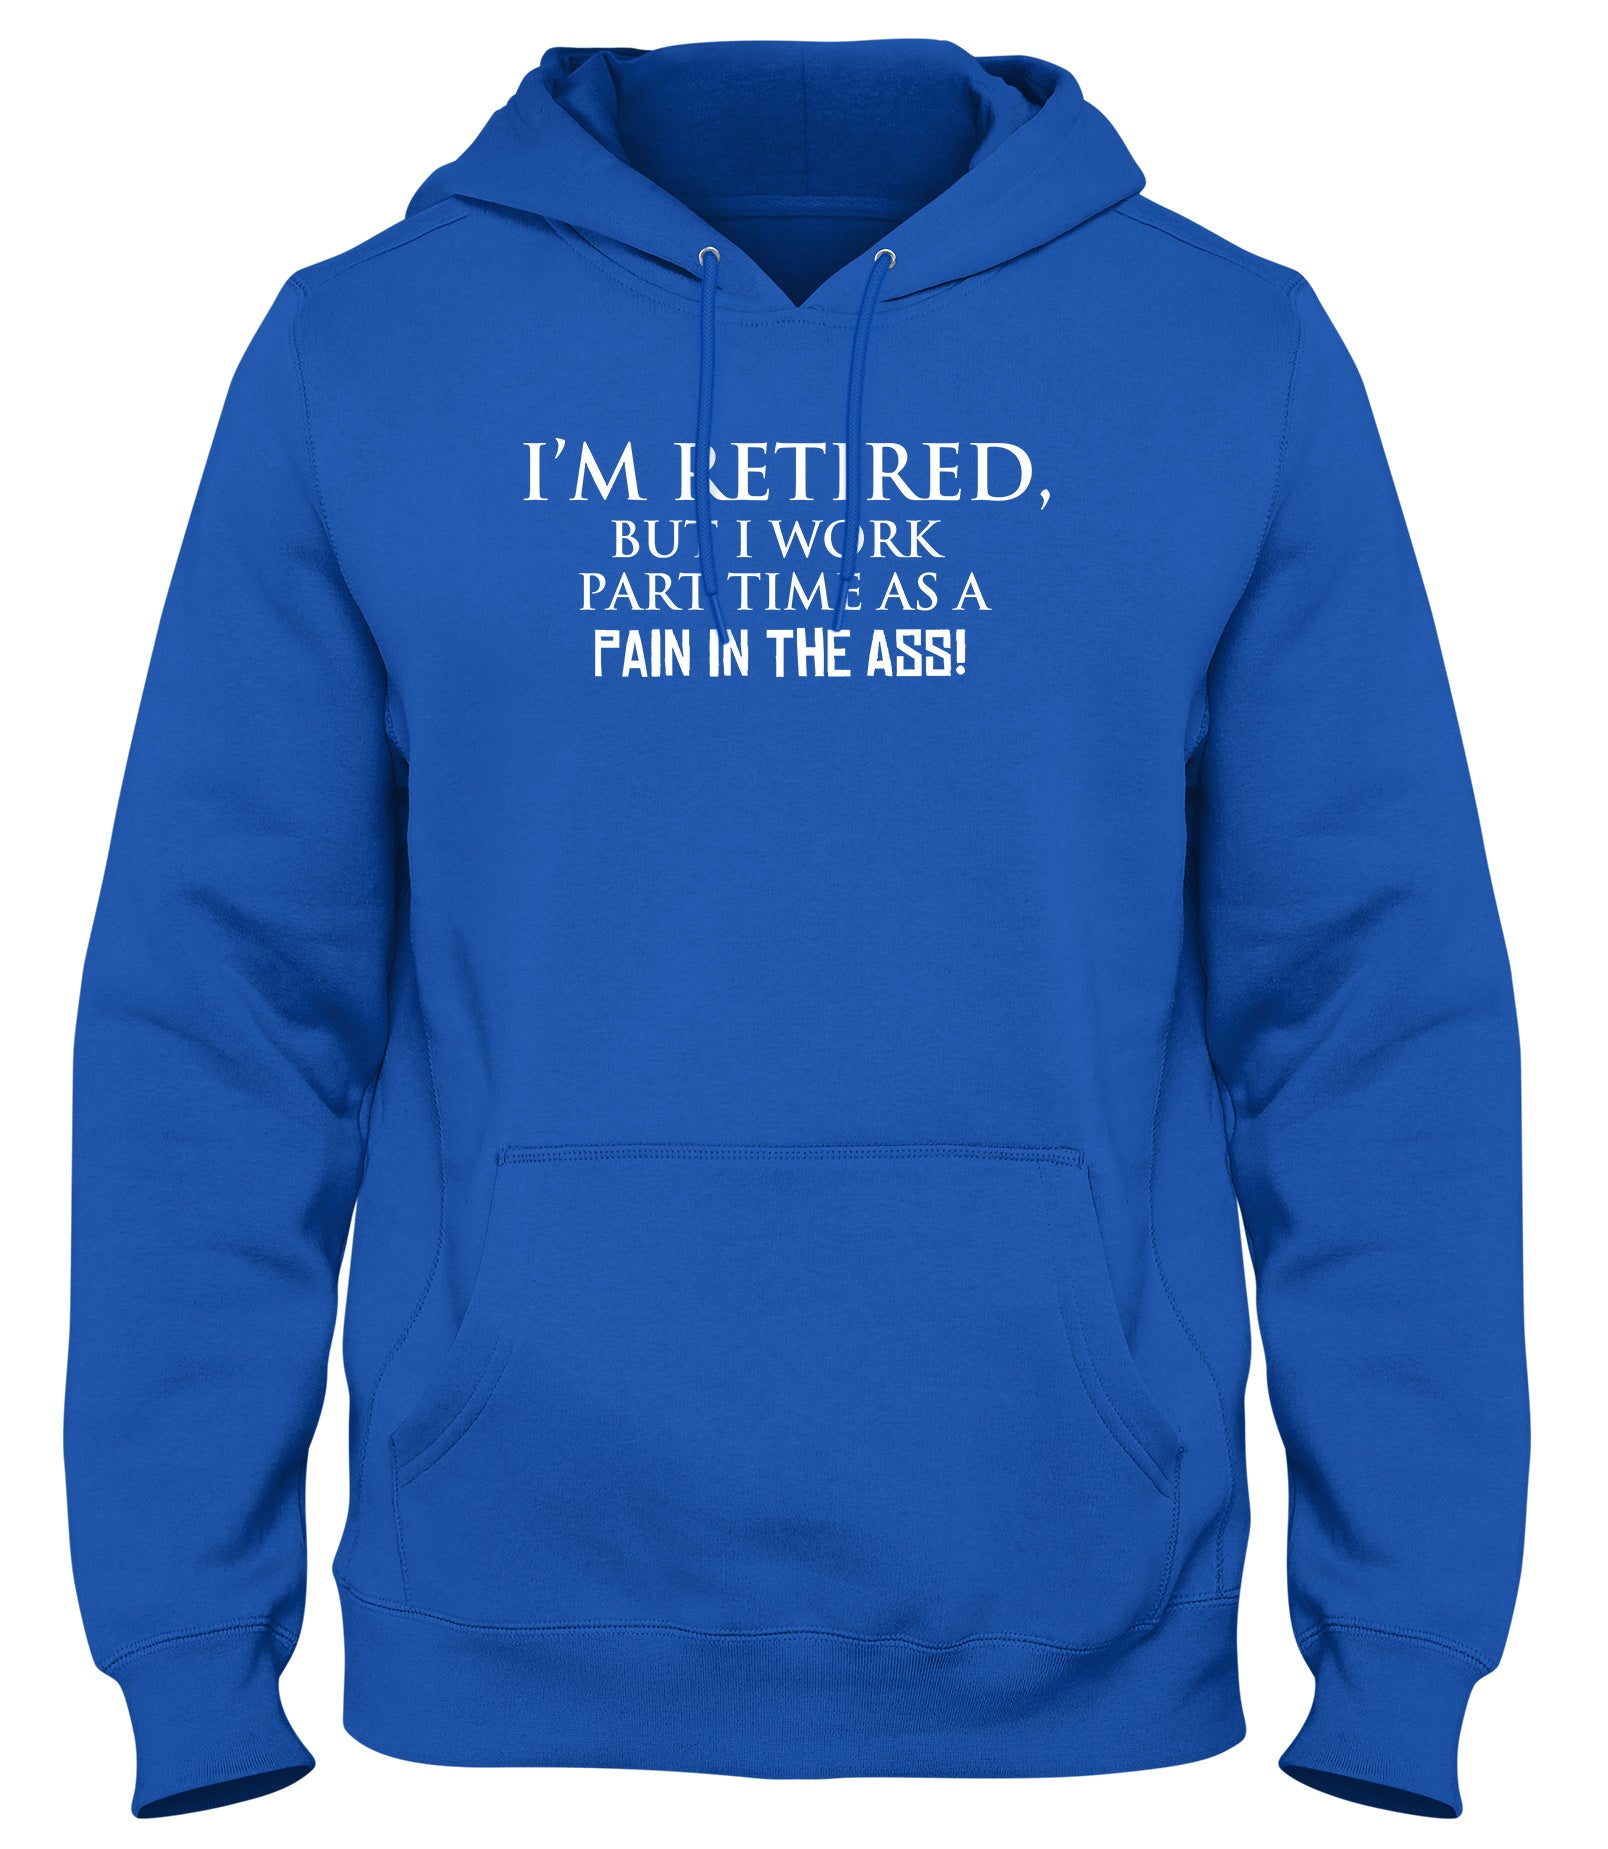 I'M RETIRED BUT I WORK PART TIME AS A PAIN IN THE ASS! WOMENS LADIES MENS UNISEX HOODIE